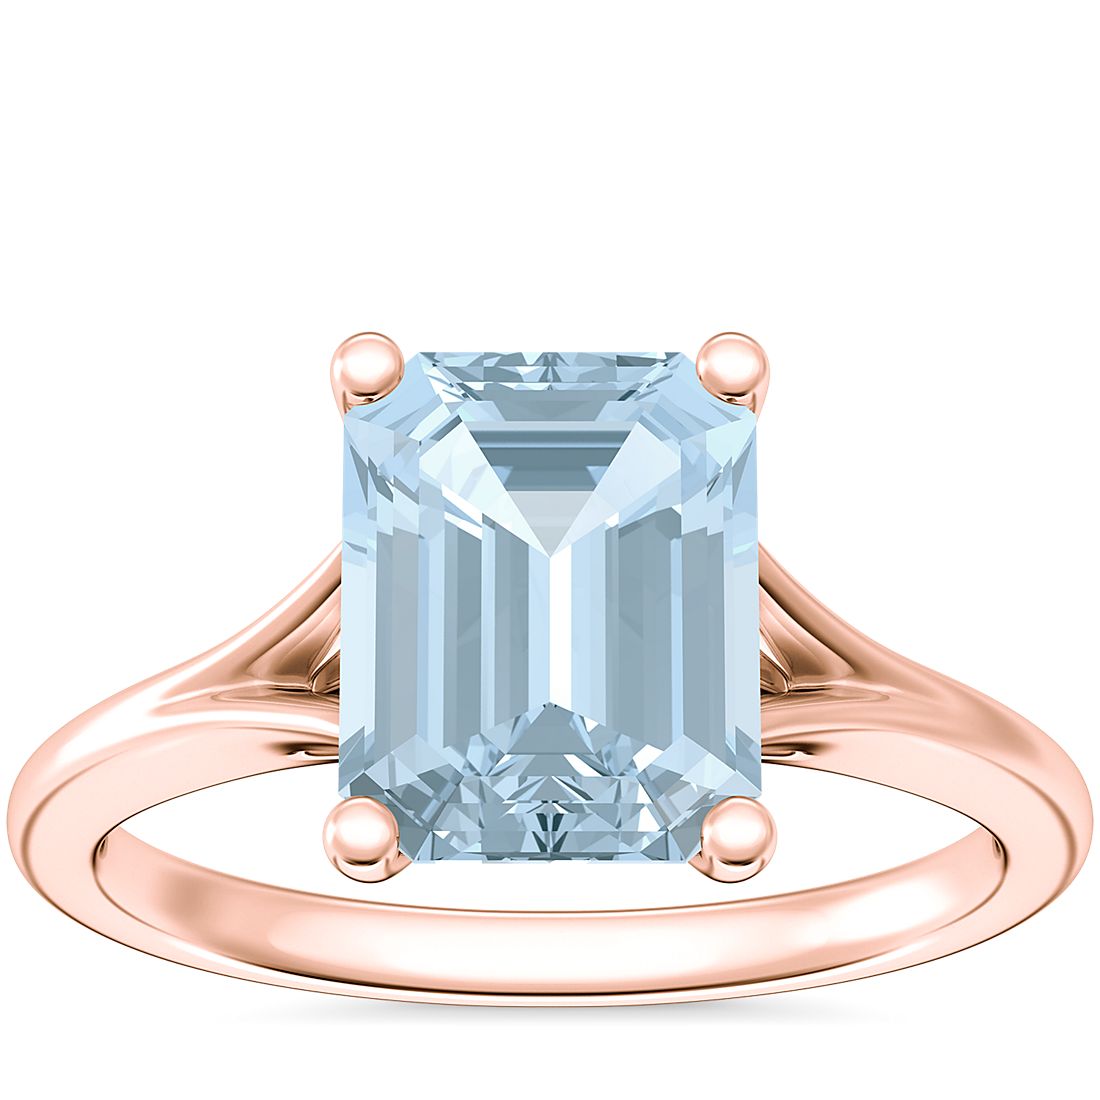 Petite Split Shank Solitaire Engagement Ring with Emerald-Cut Aquamarine in 14k Rose Gold (9x7mm)